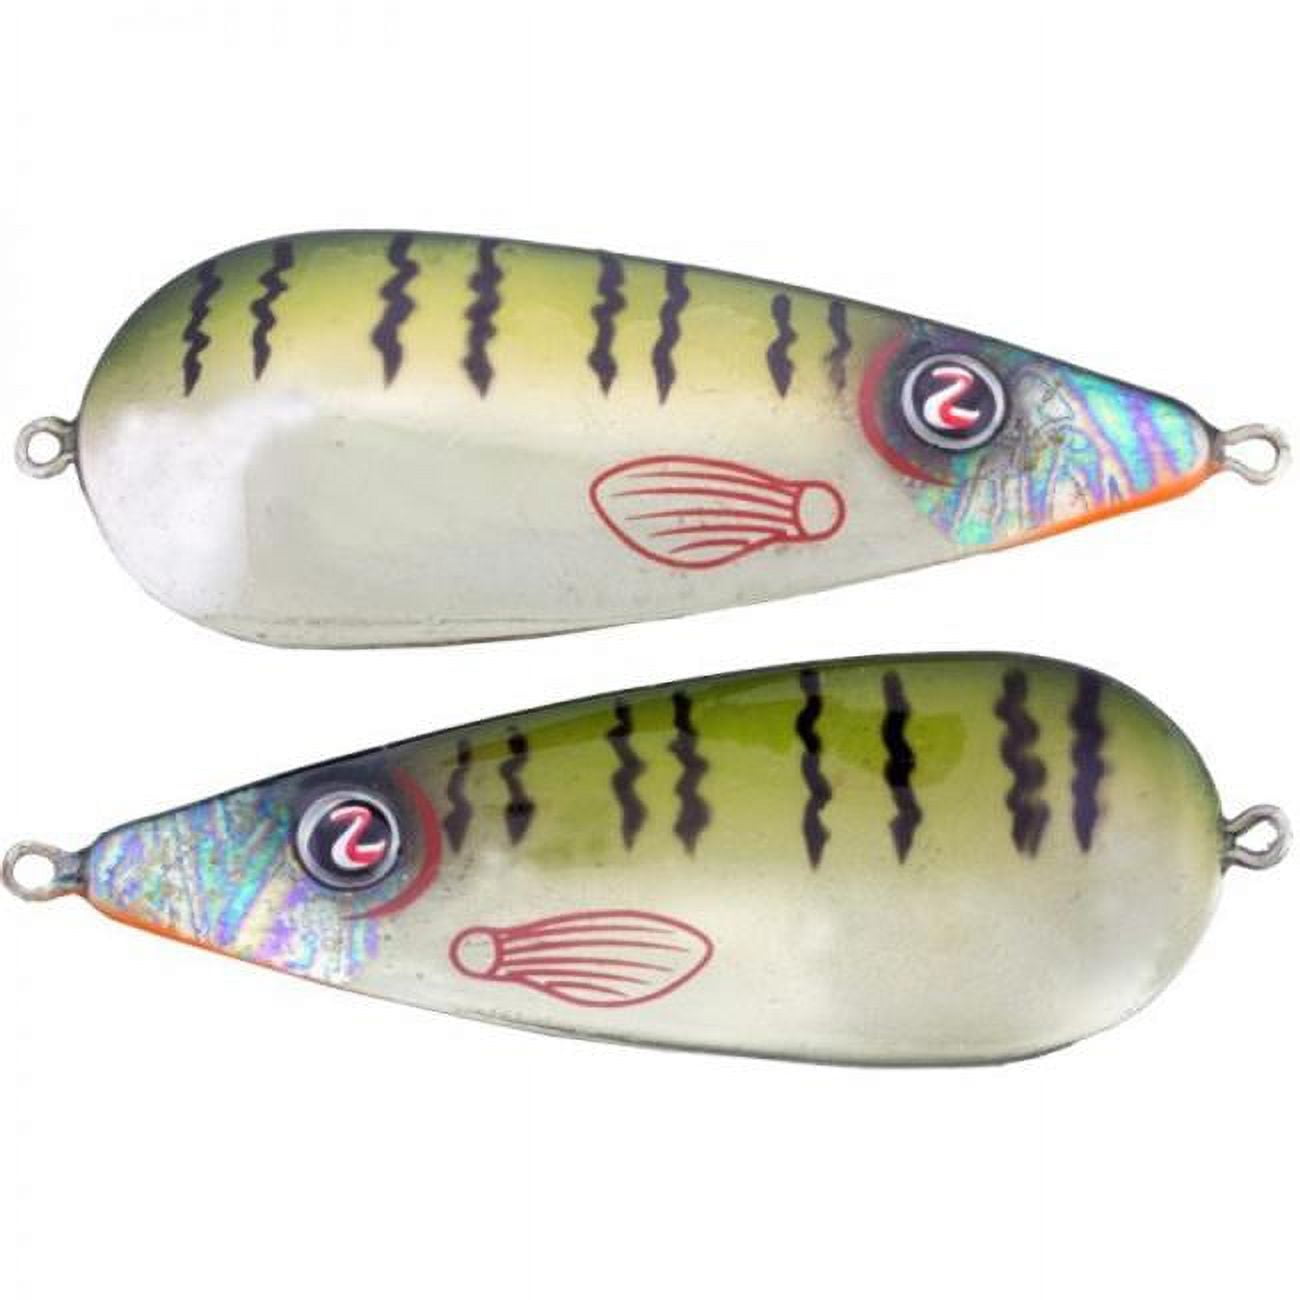 River2Sea WWS100-07 World Wide Spoon 100 Bait Lures, 07 Blue Gill 